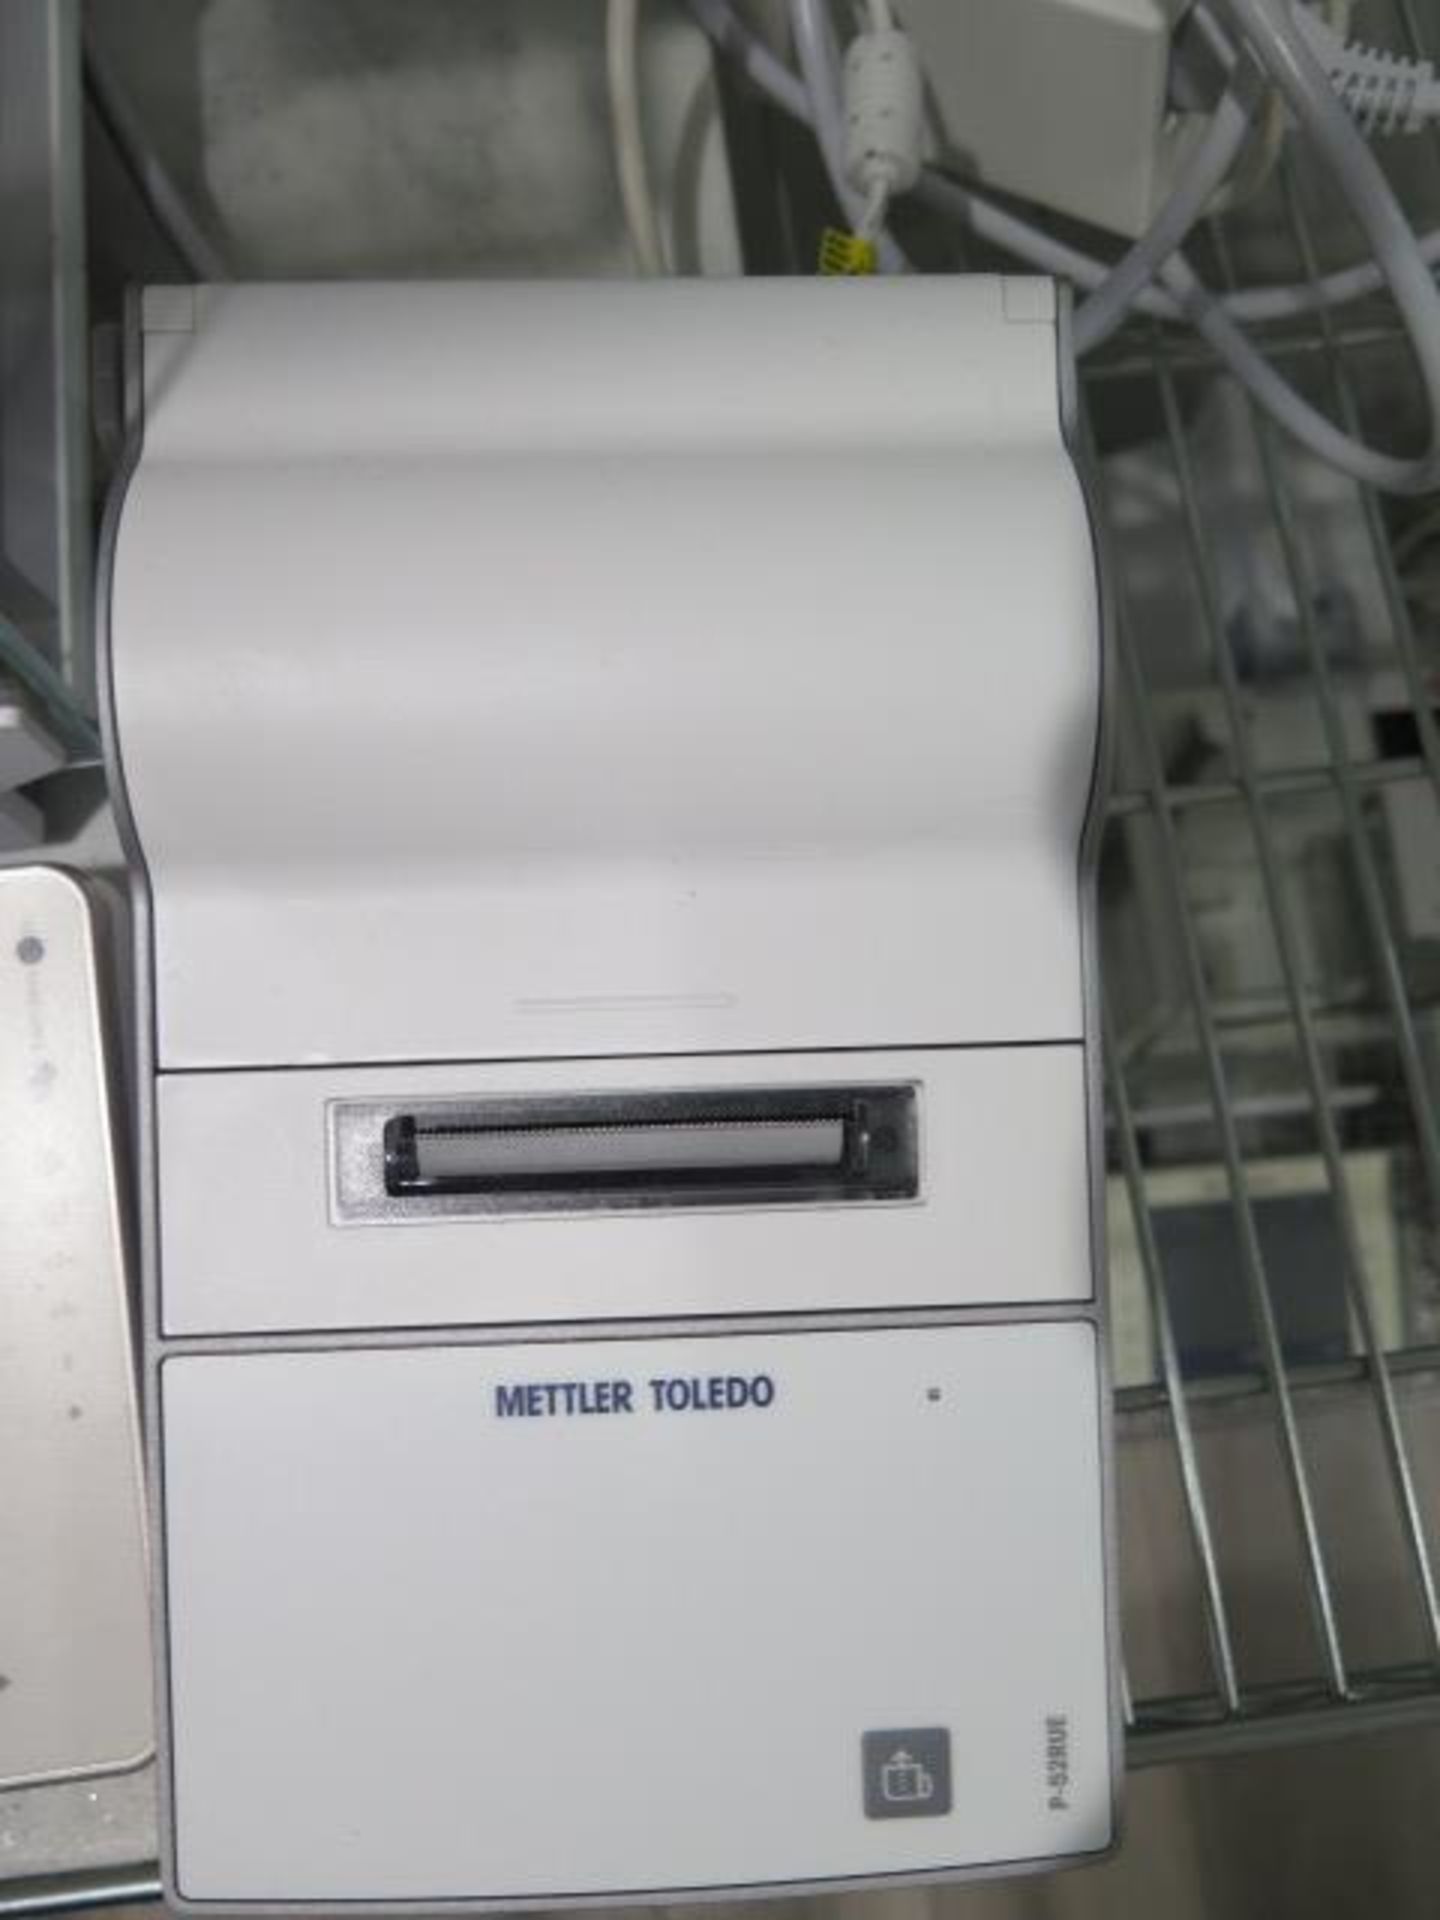 Mettler Toledo XPE205 DeltaRange Analytical Balance Scale 0.01mg-220g w/ Static Detect, SOLD AS IS - Image 6 of 8